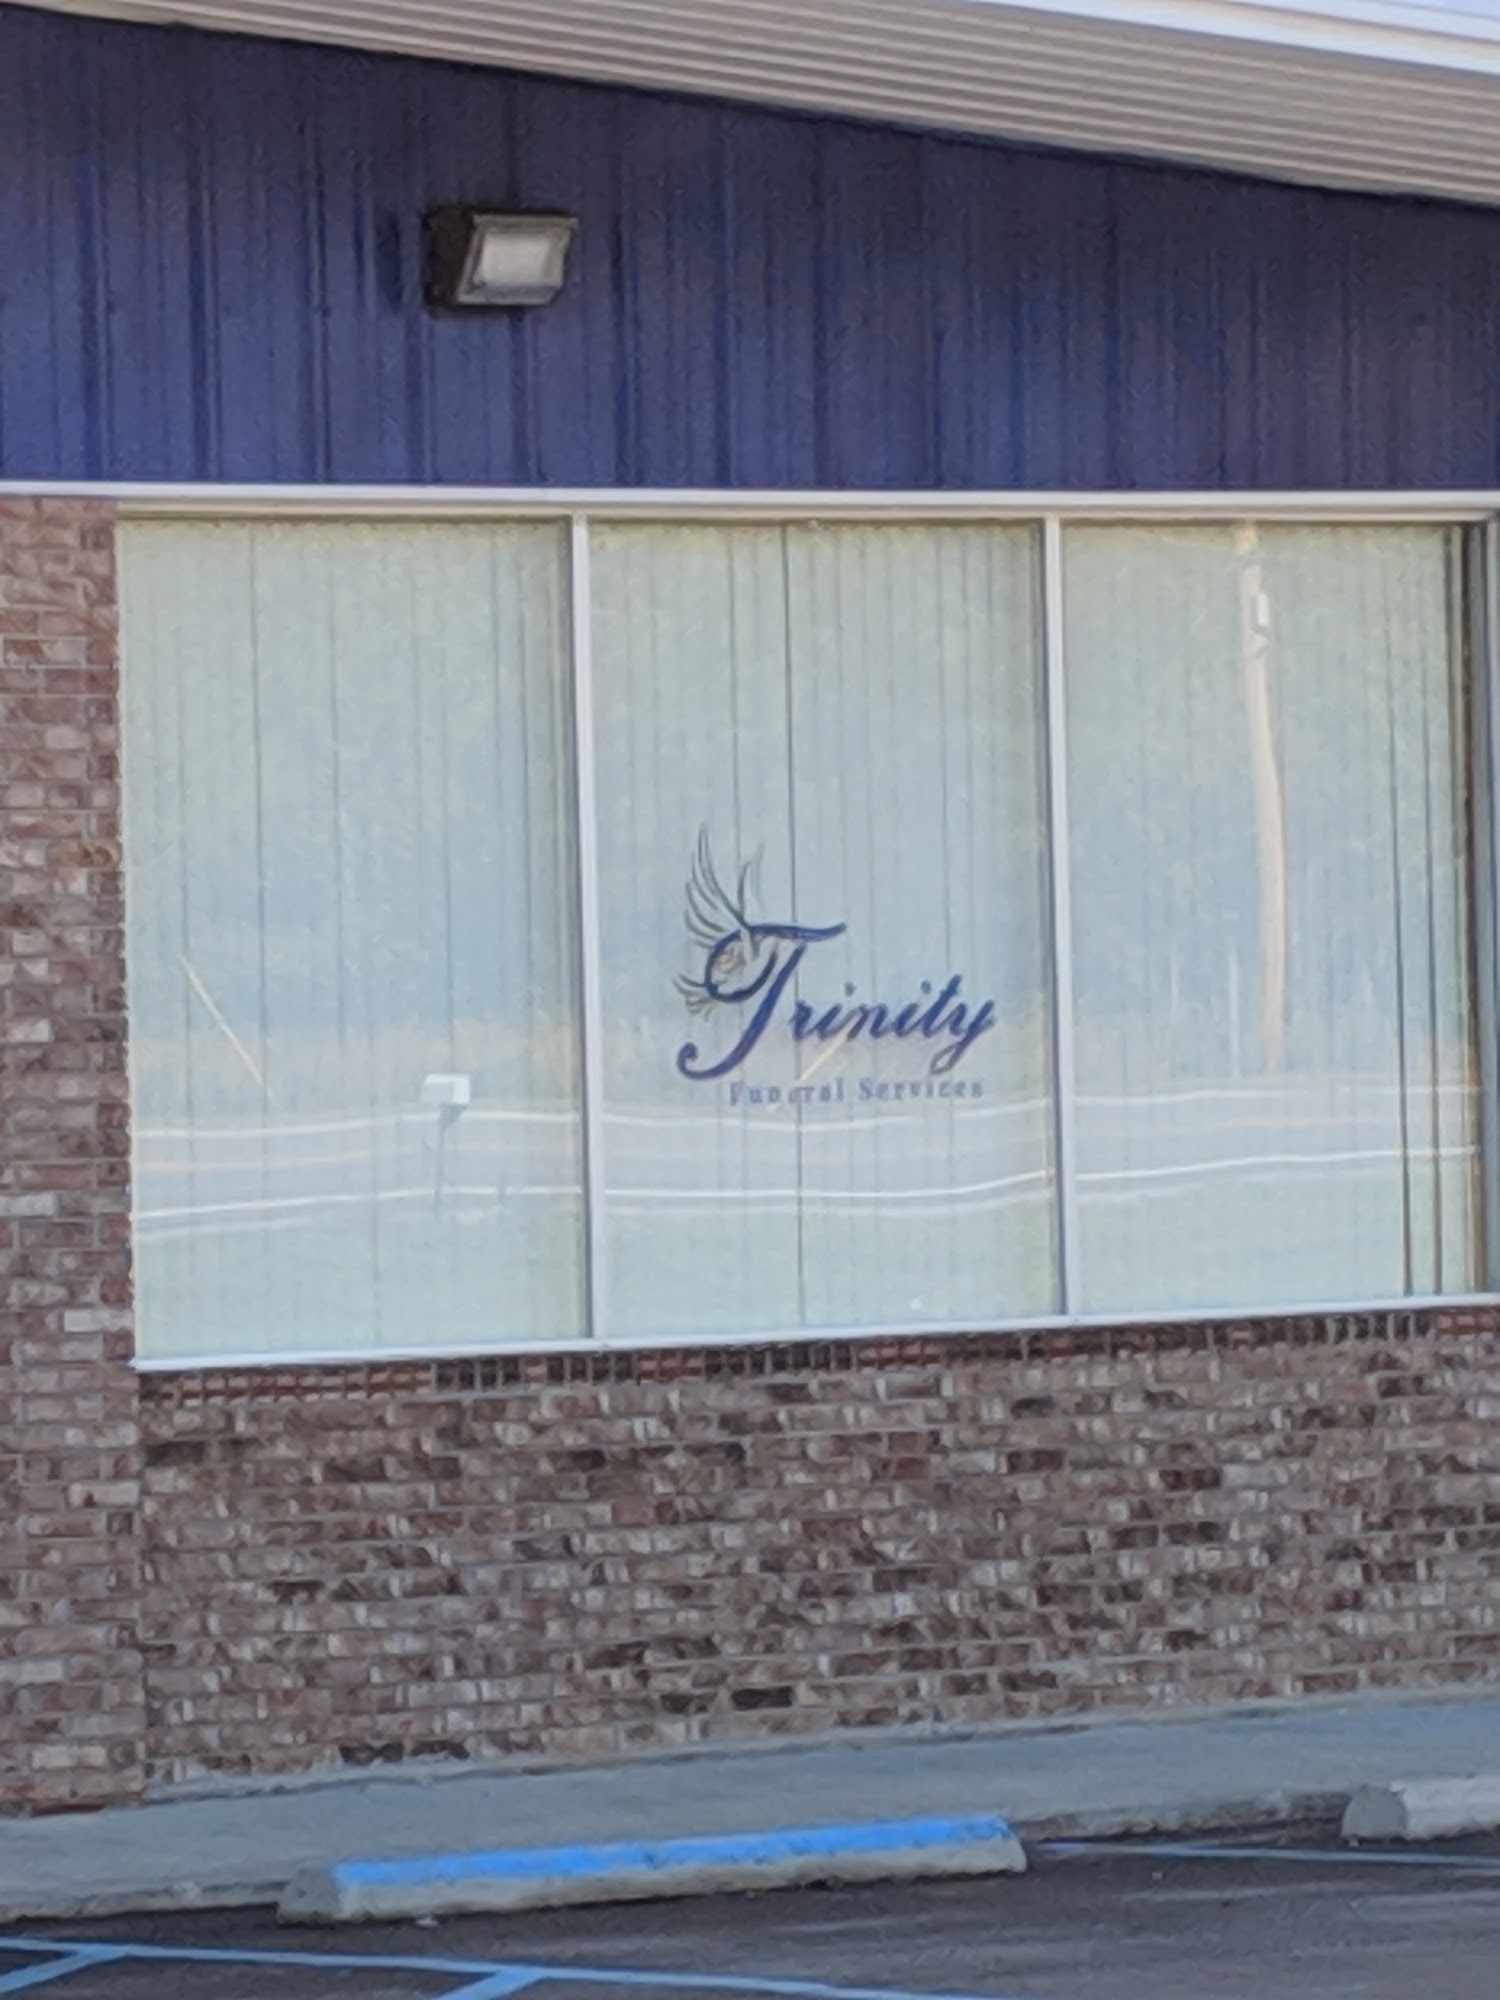 Trinity Funeral Services 890 E Main Ave, Lumberton Mississippi 39455